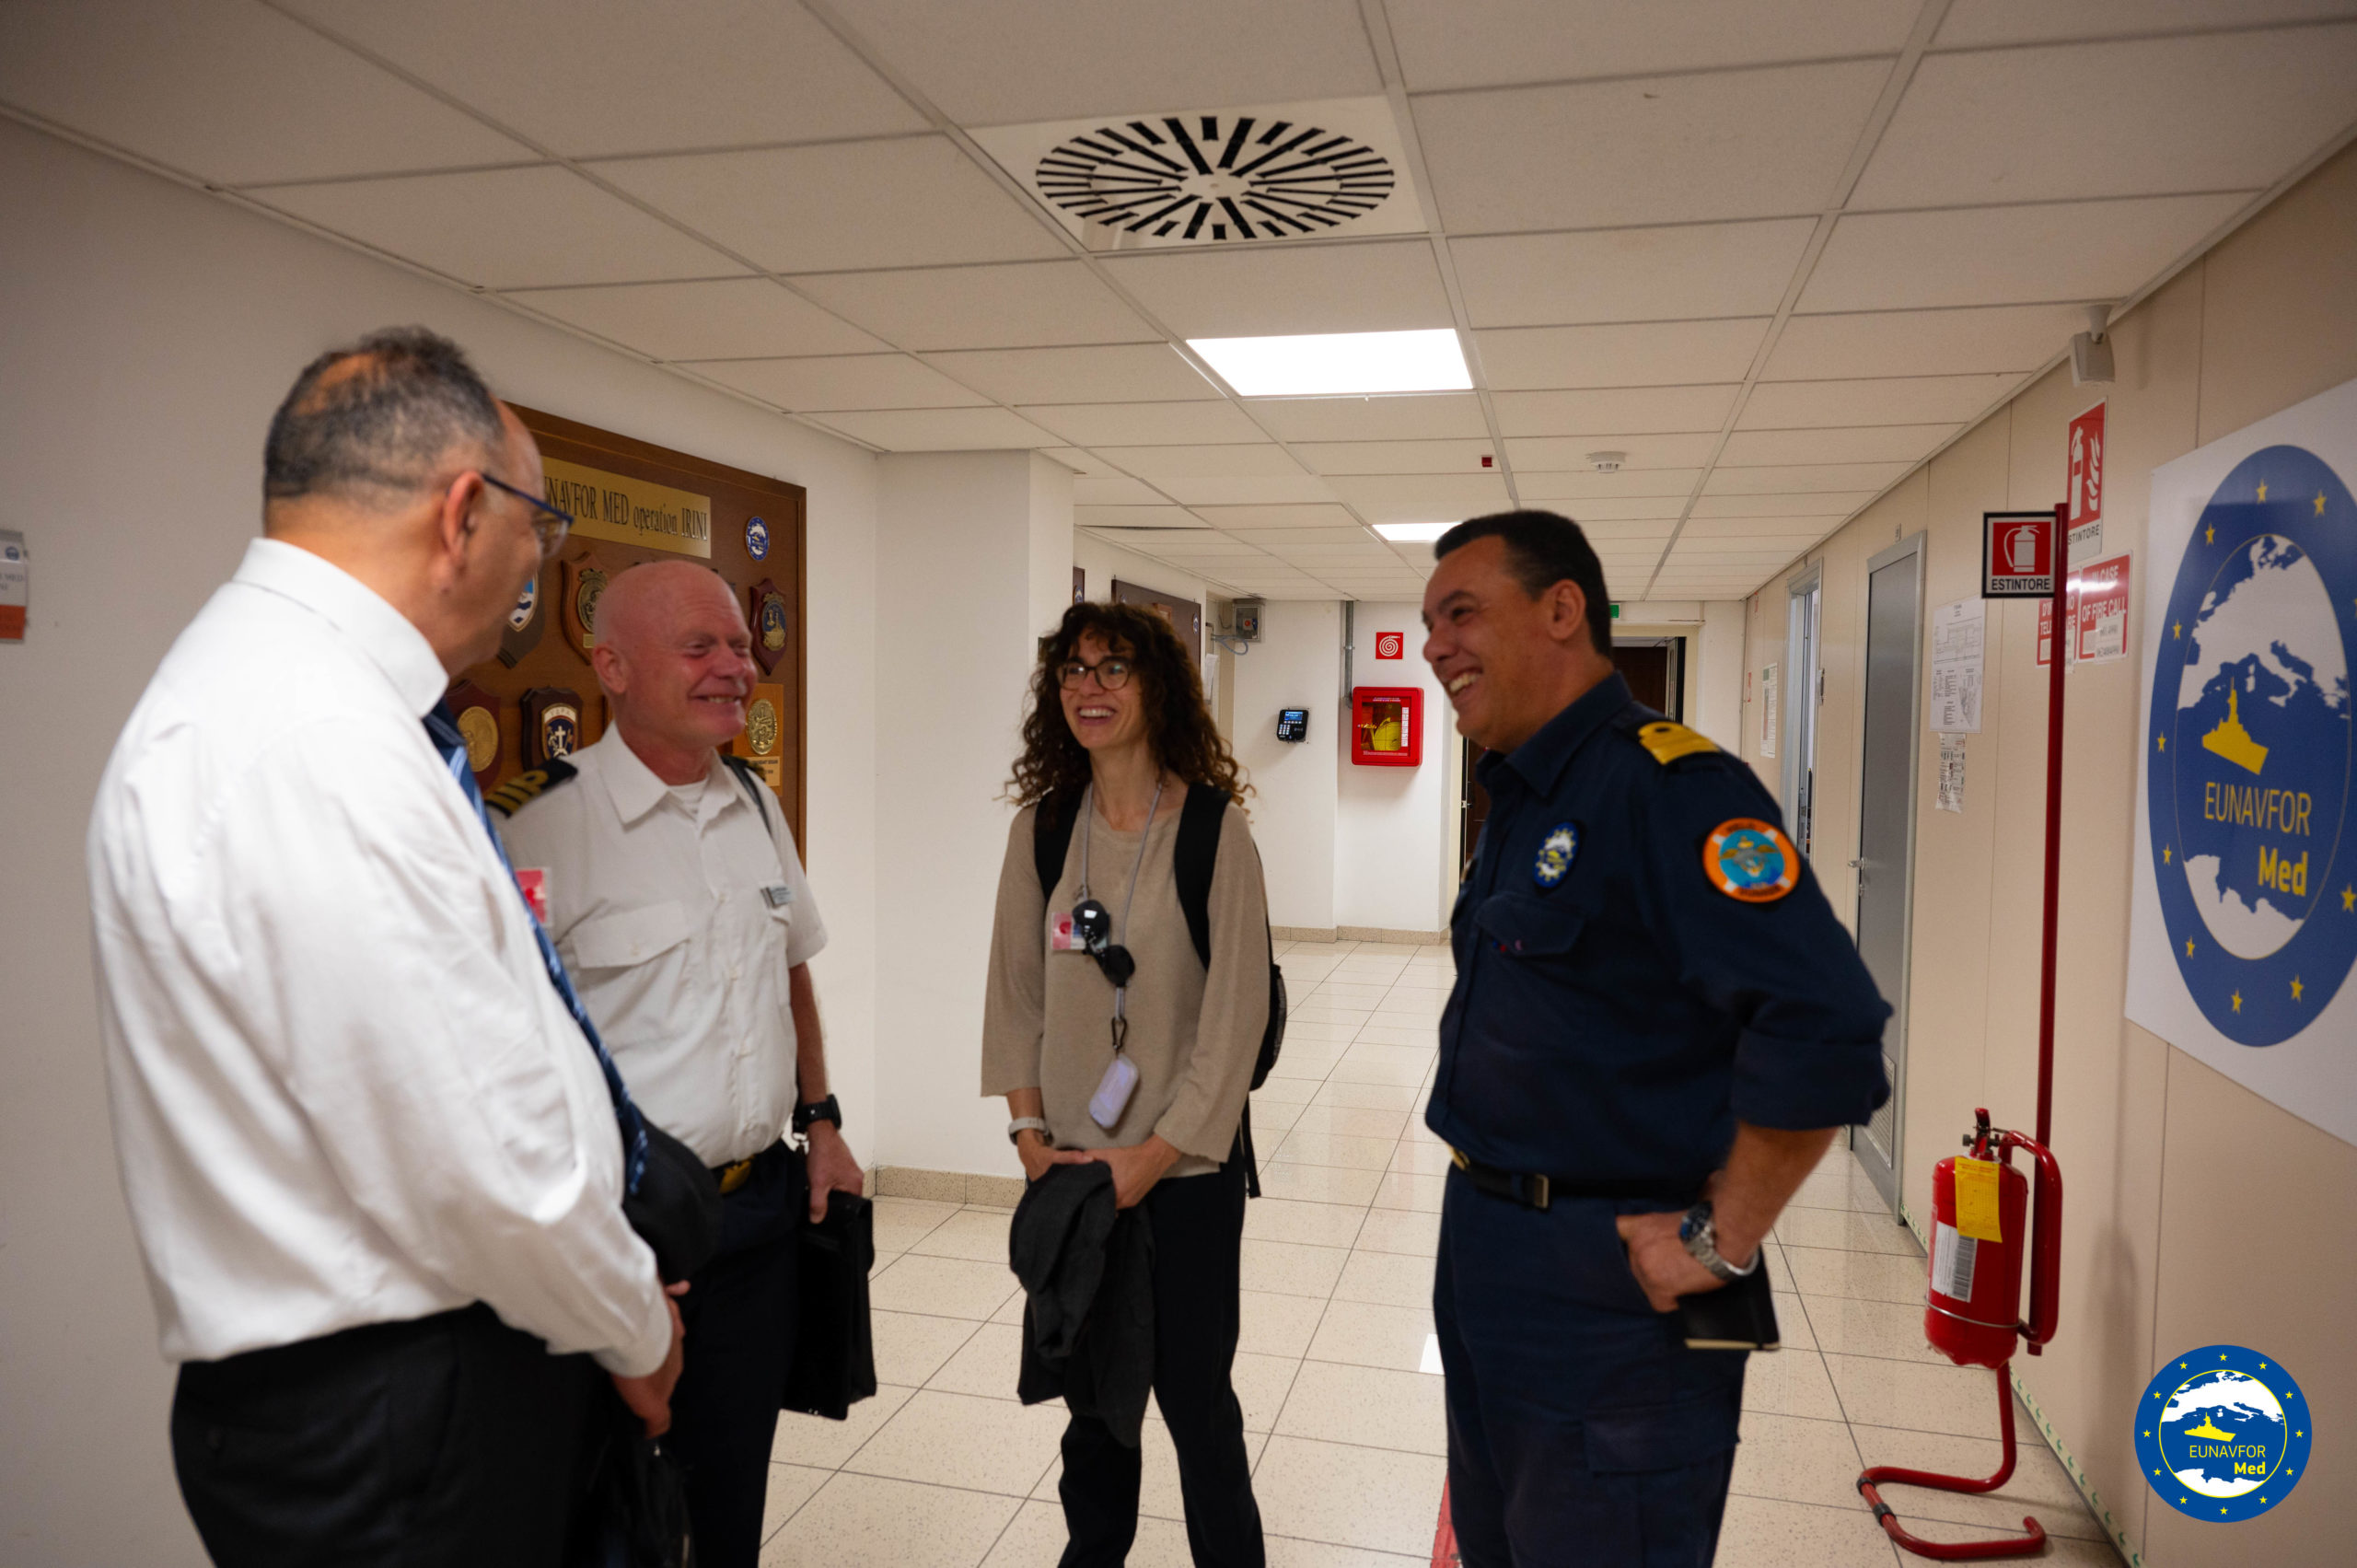 Recently delegation of the European Maritime Safety Agency EMSA visited the OHQ of the EUNAVFOR MED Operation IRINI